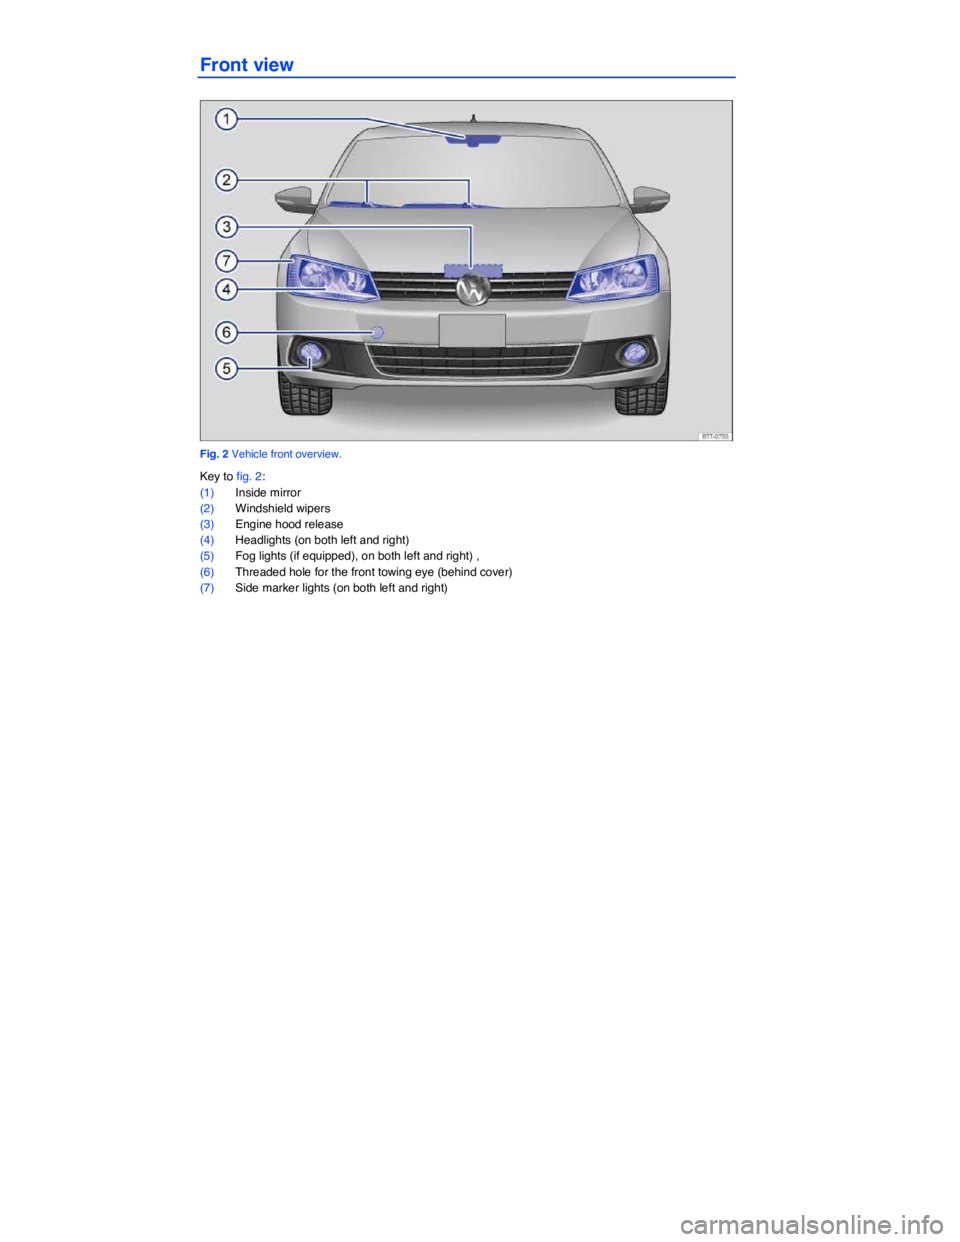 VOLKSWAGEN JETTA 1.8T SE 2014  Owners Manual  
Front view 
 
Fig. 2 Vehicle front overview. 
Key to fig. 2: 
(1) Inside mirror  
(2) Windshield wipers  
(3) Engine hood release  
(4) Headlights (on both left and right)  
(5) Fog lights (if equip